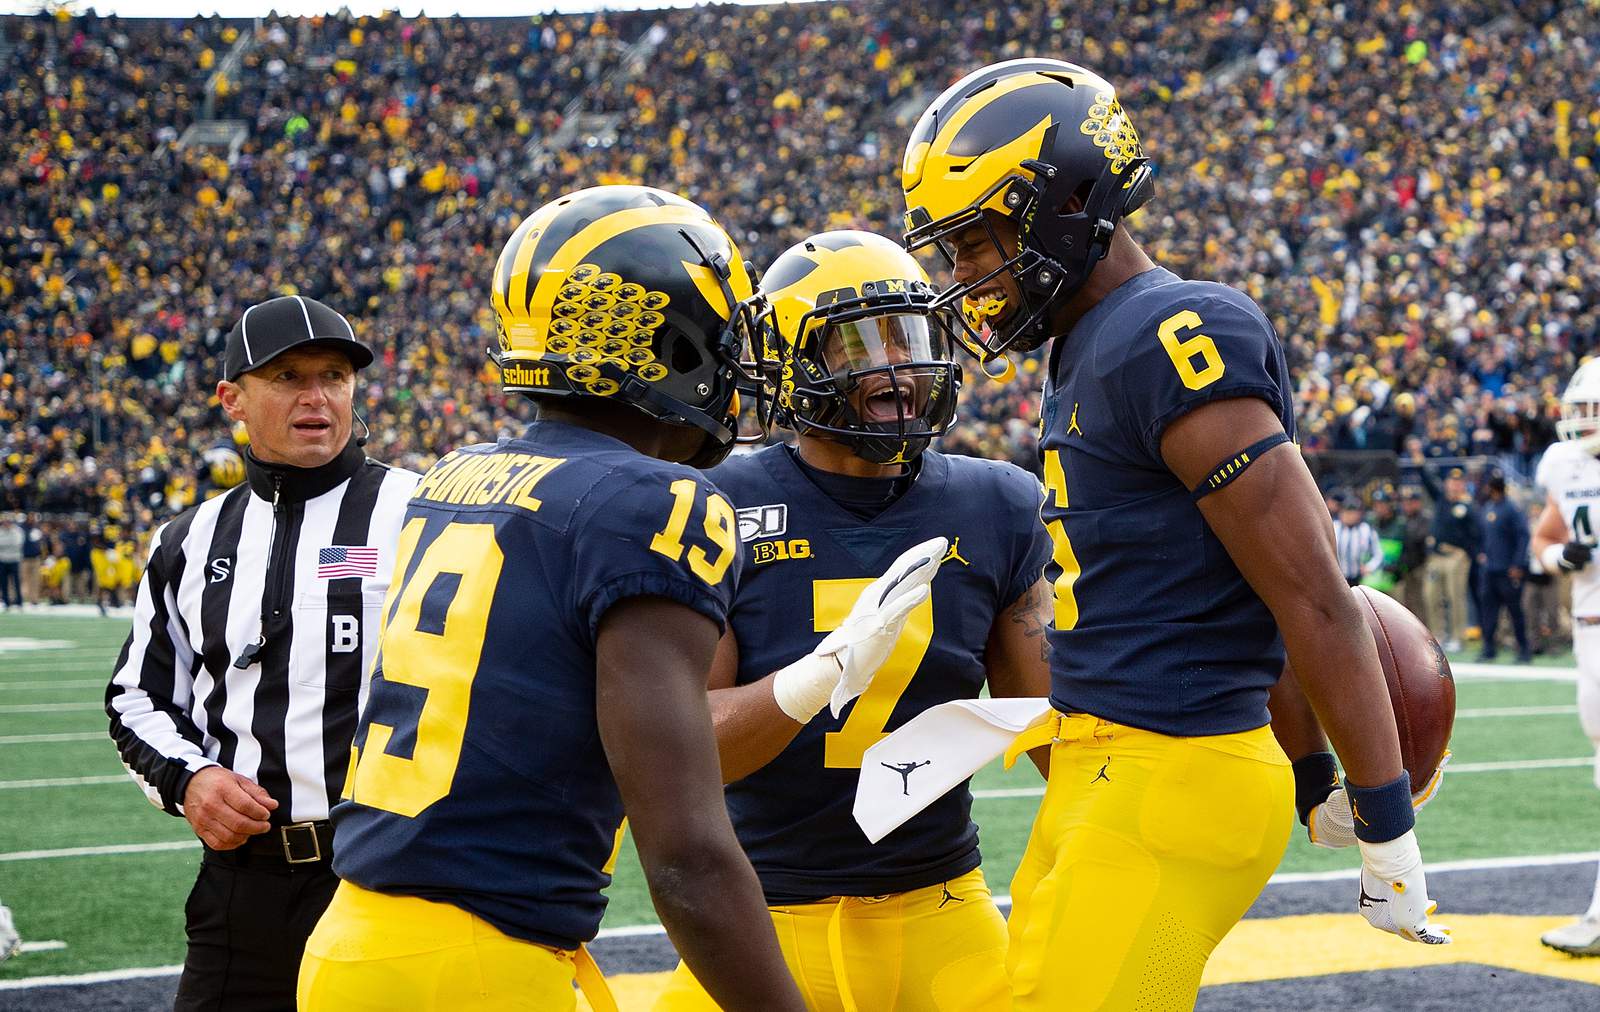 Recruiting class leaves Michigan football with stacked offense, holes on defense